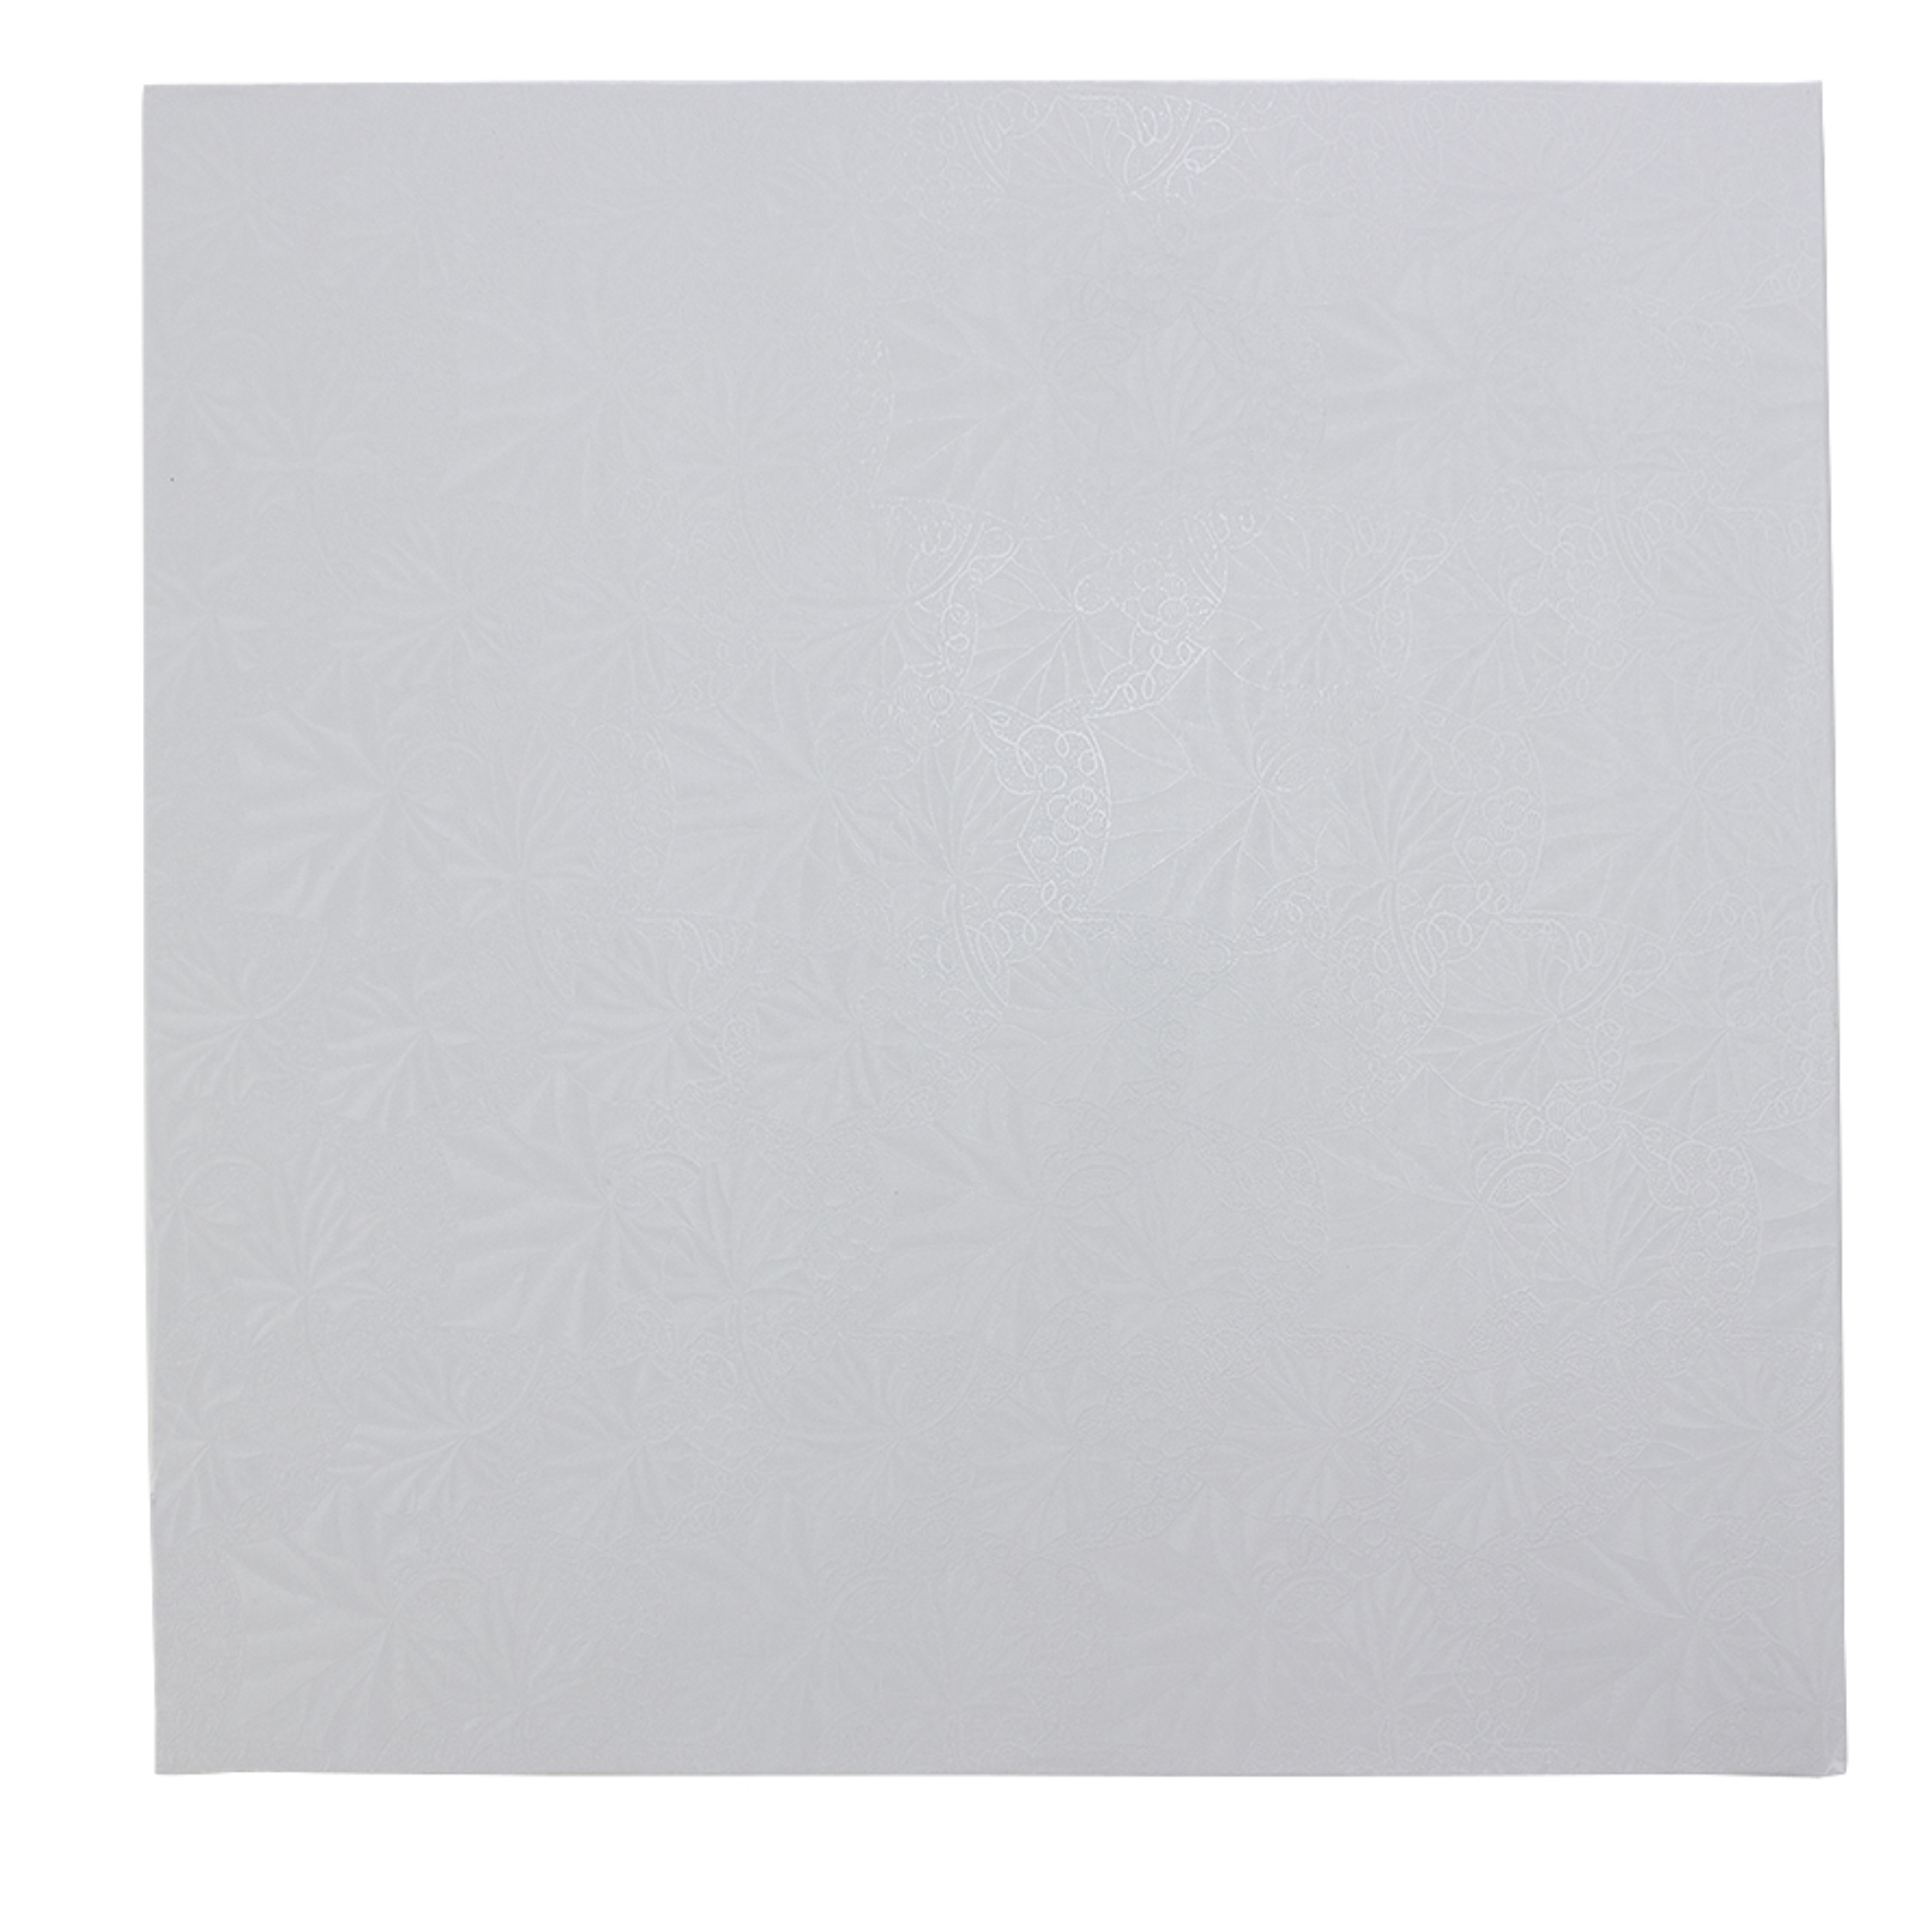 Square Foil Covered Cake Board 12" 5pc/pack - White